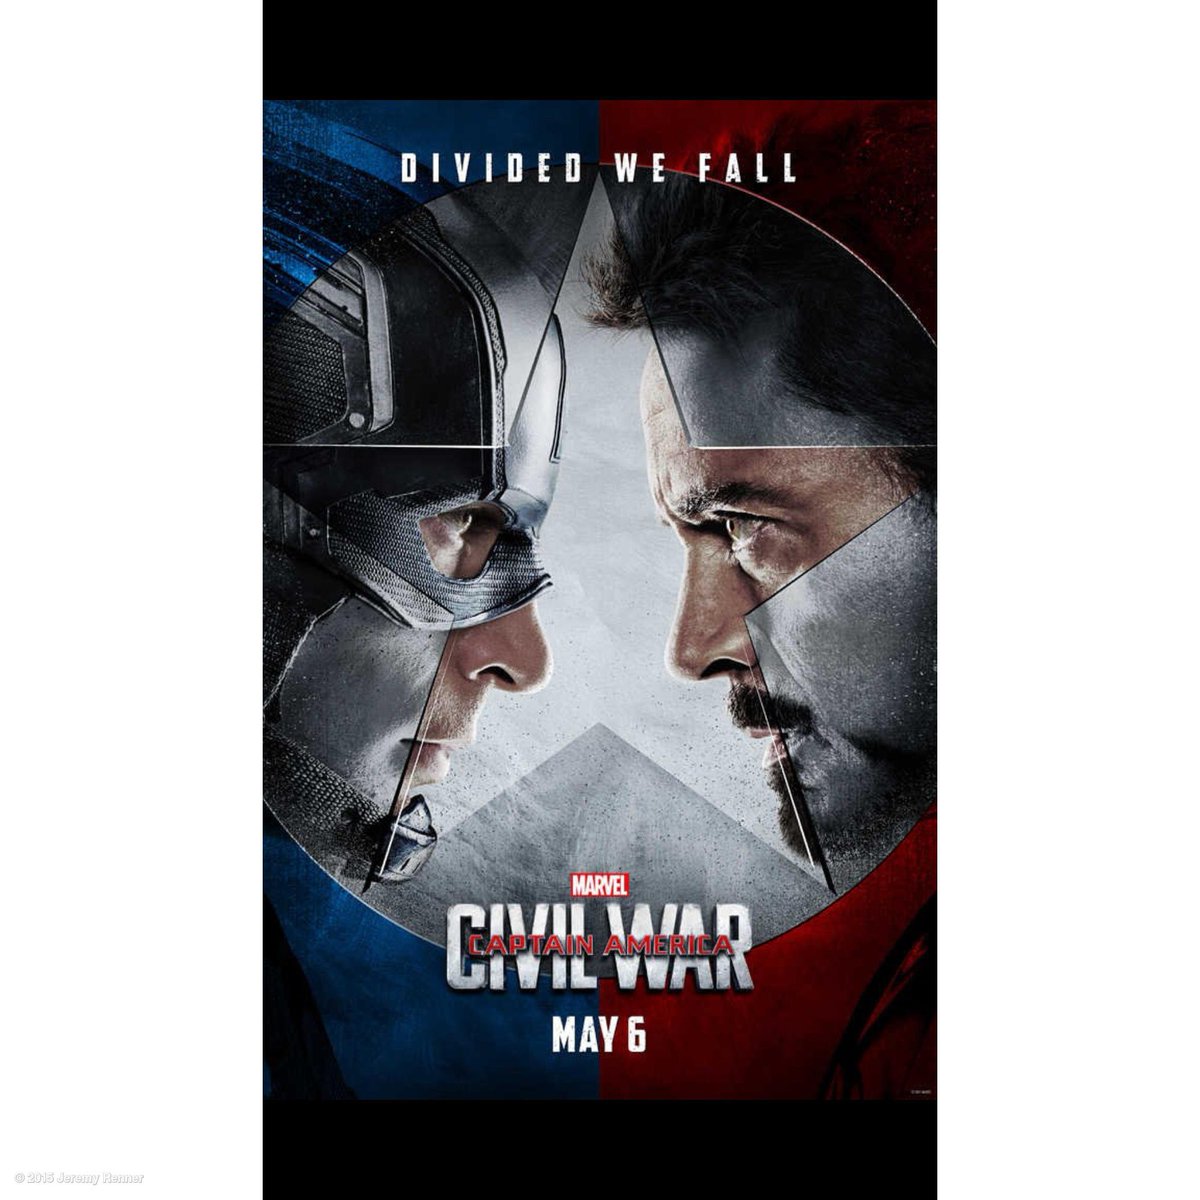 Anyone know how this turns out? @ChrisEvans @RobertDowneyJr #curious #marvel #civilwar #trailer https://t.co/n9JU9Z6UMg